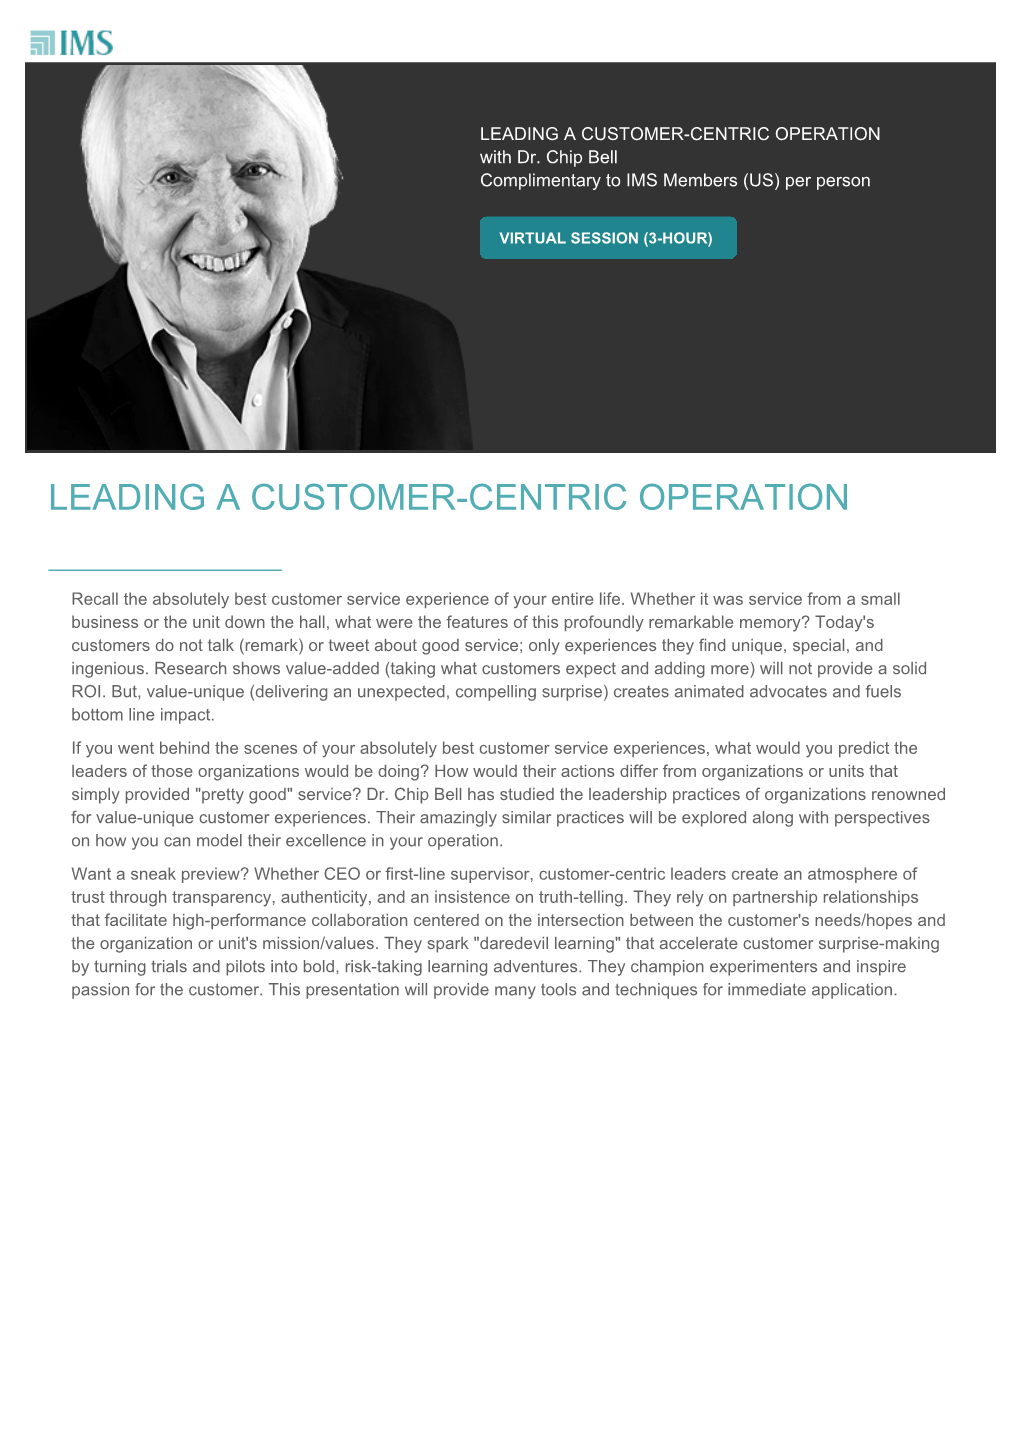 LEADING a CUSTOMER-CENTRIC OPERATION with Dr